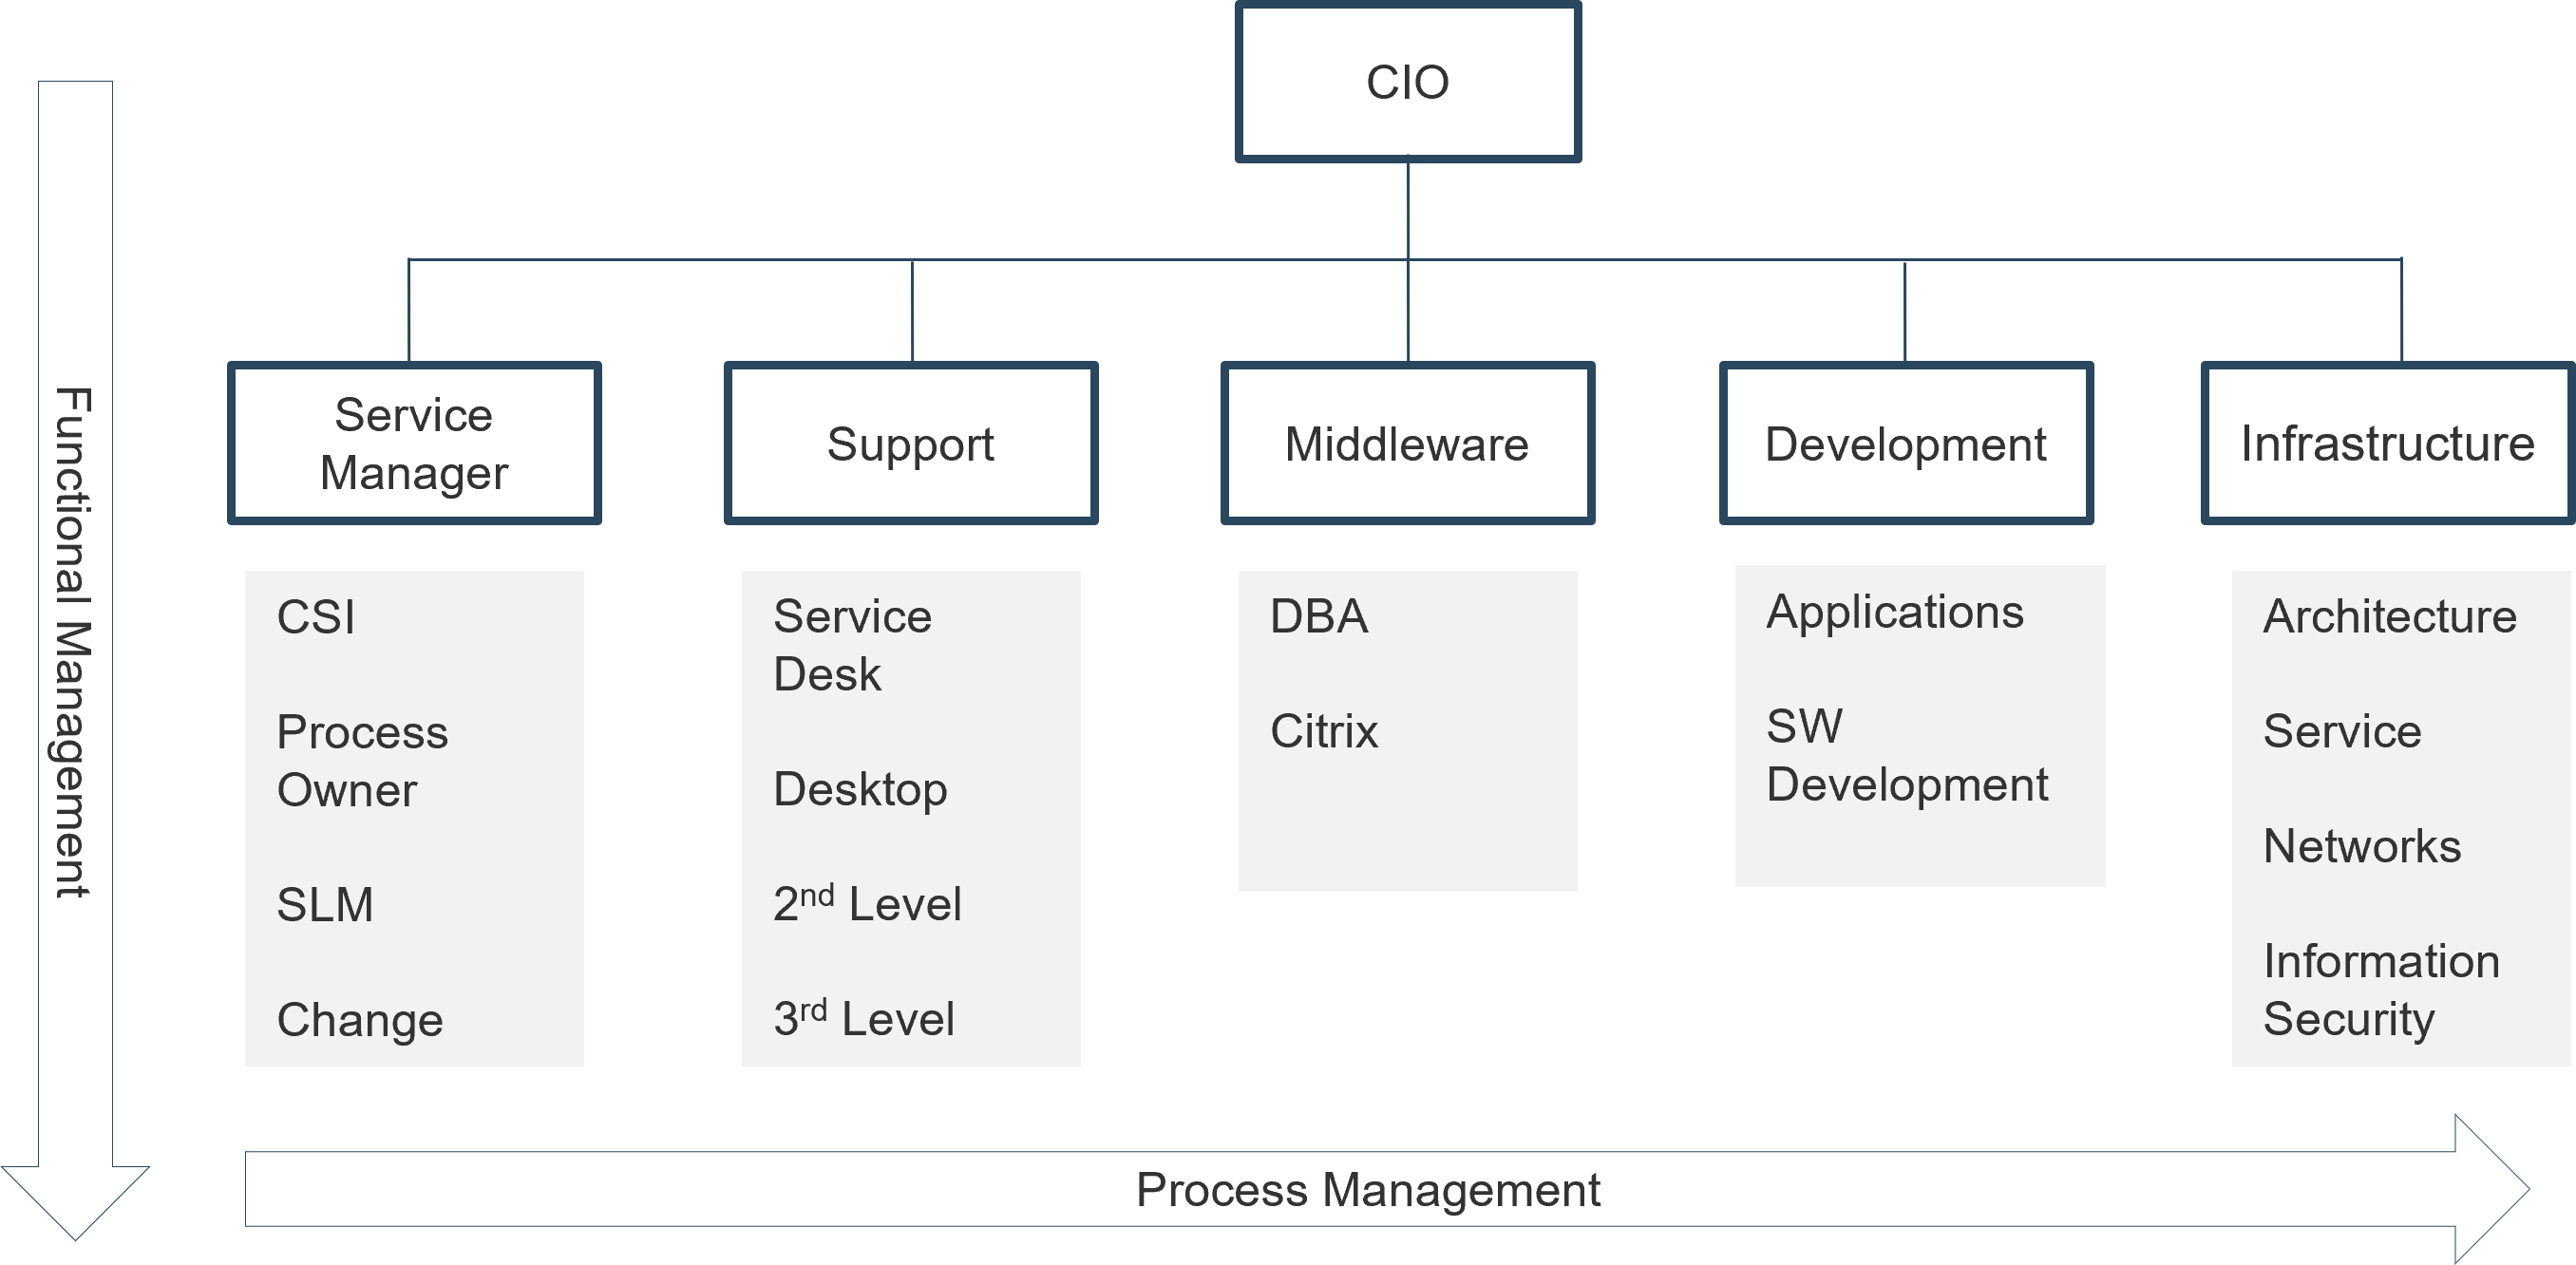 A centralized process ownership model is shown. The CIO is at the top and the following are branches below it: Service Manager, Support, Middleware, Development, and Infrastructure.